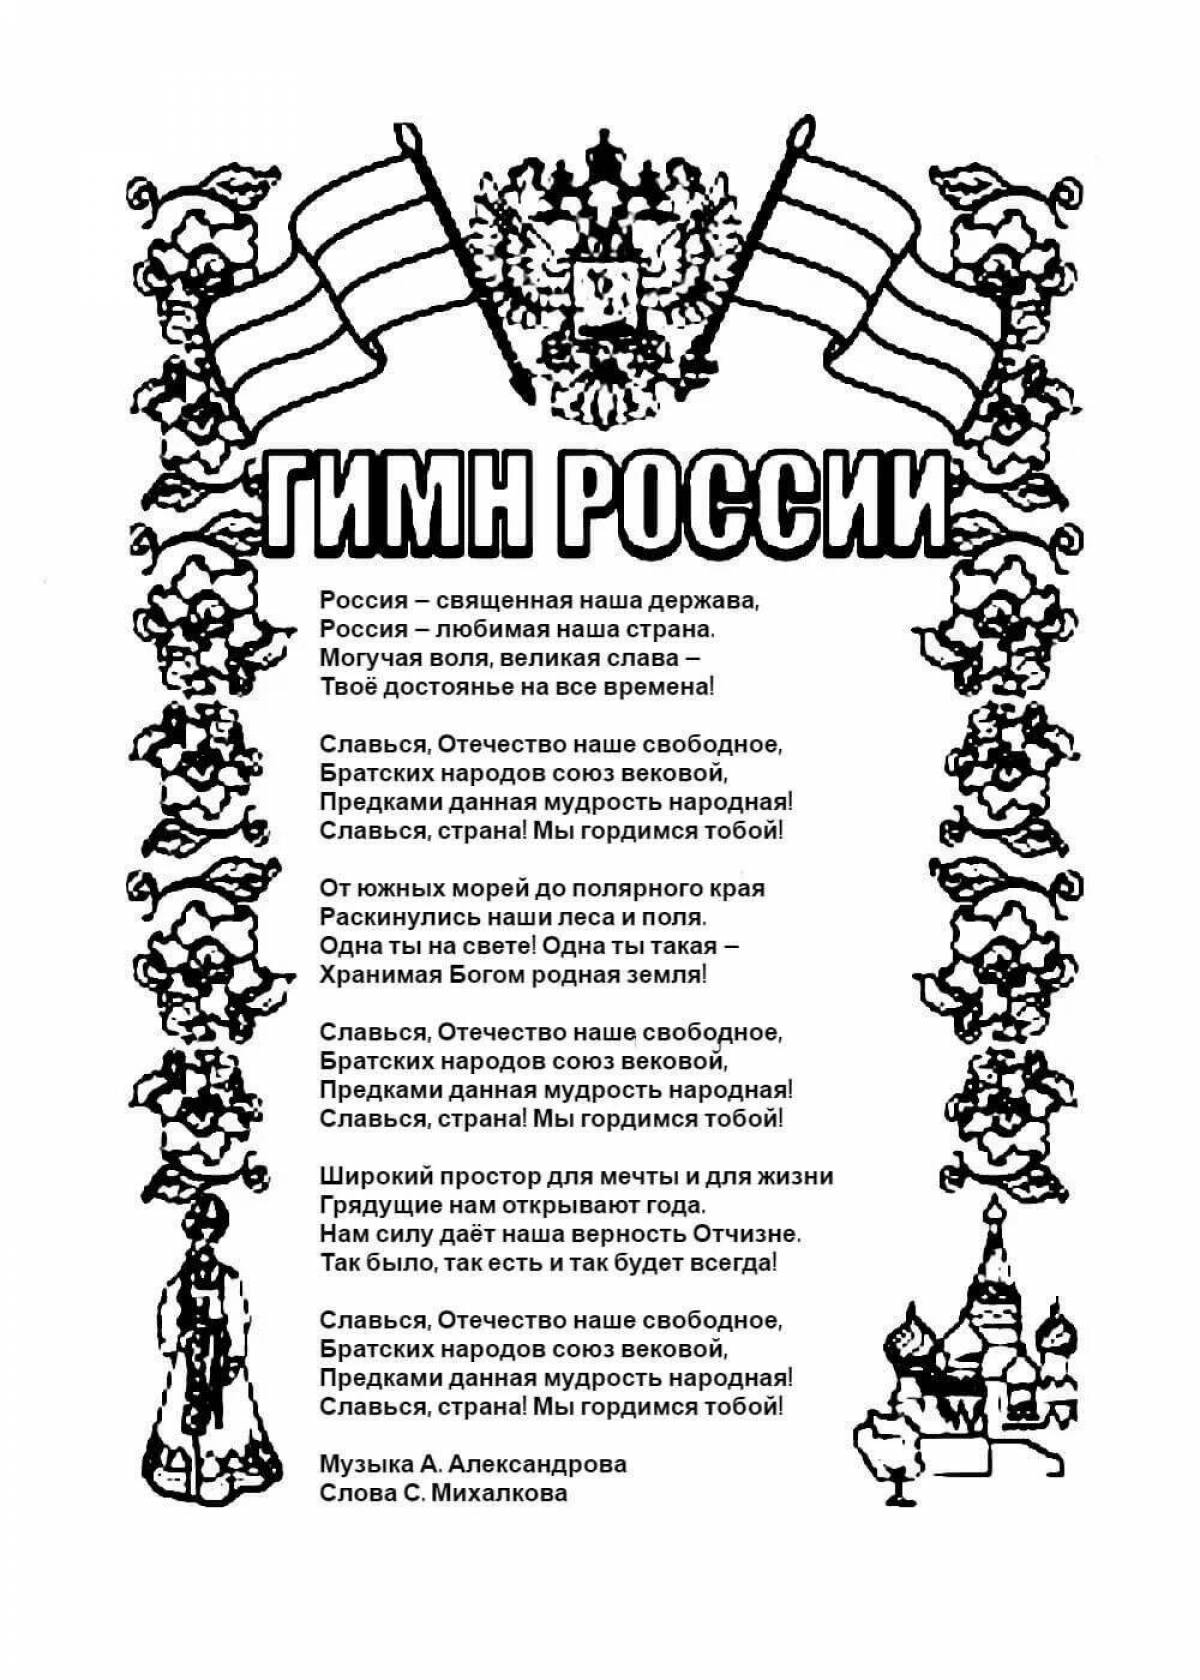 Coloring page stimulating constitution of russia for students